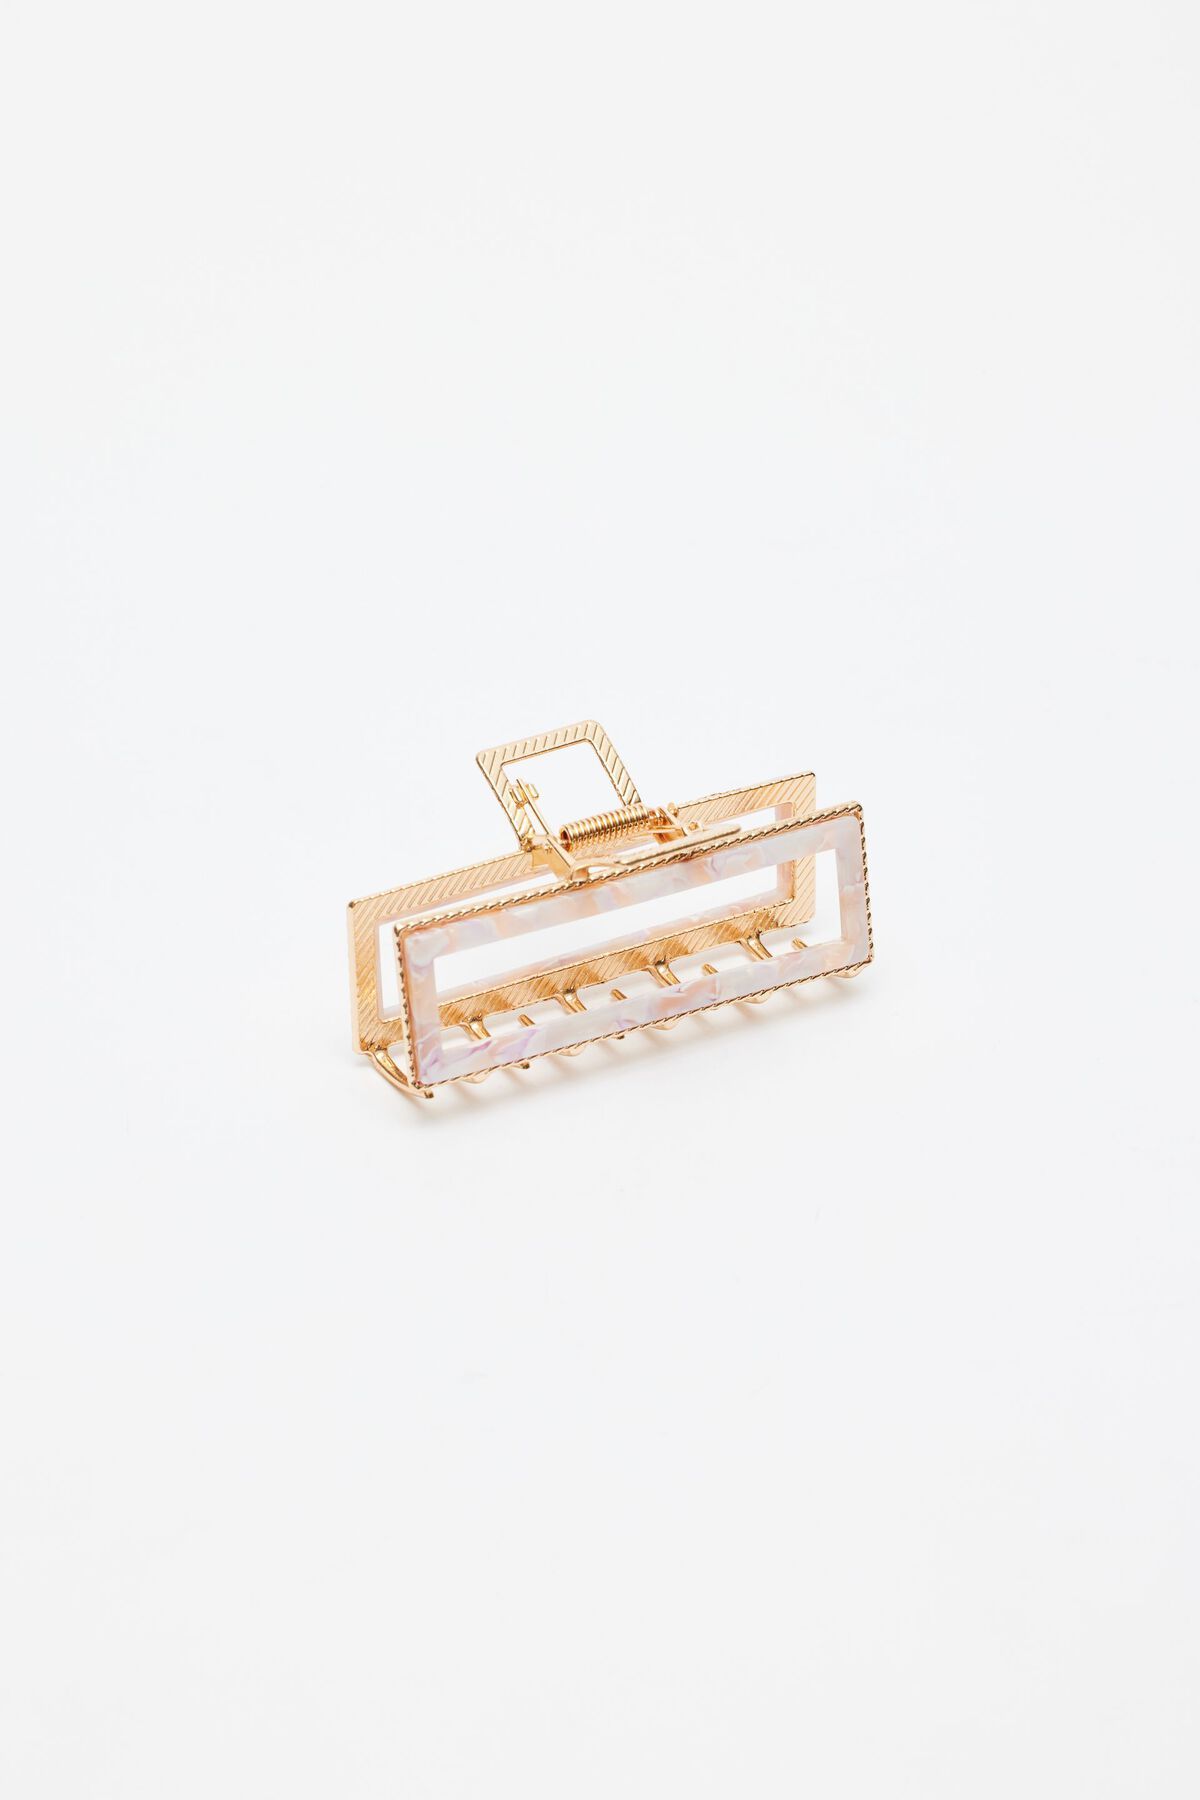 Dynamite Metal Rectangle Claw Hair Clip. 2